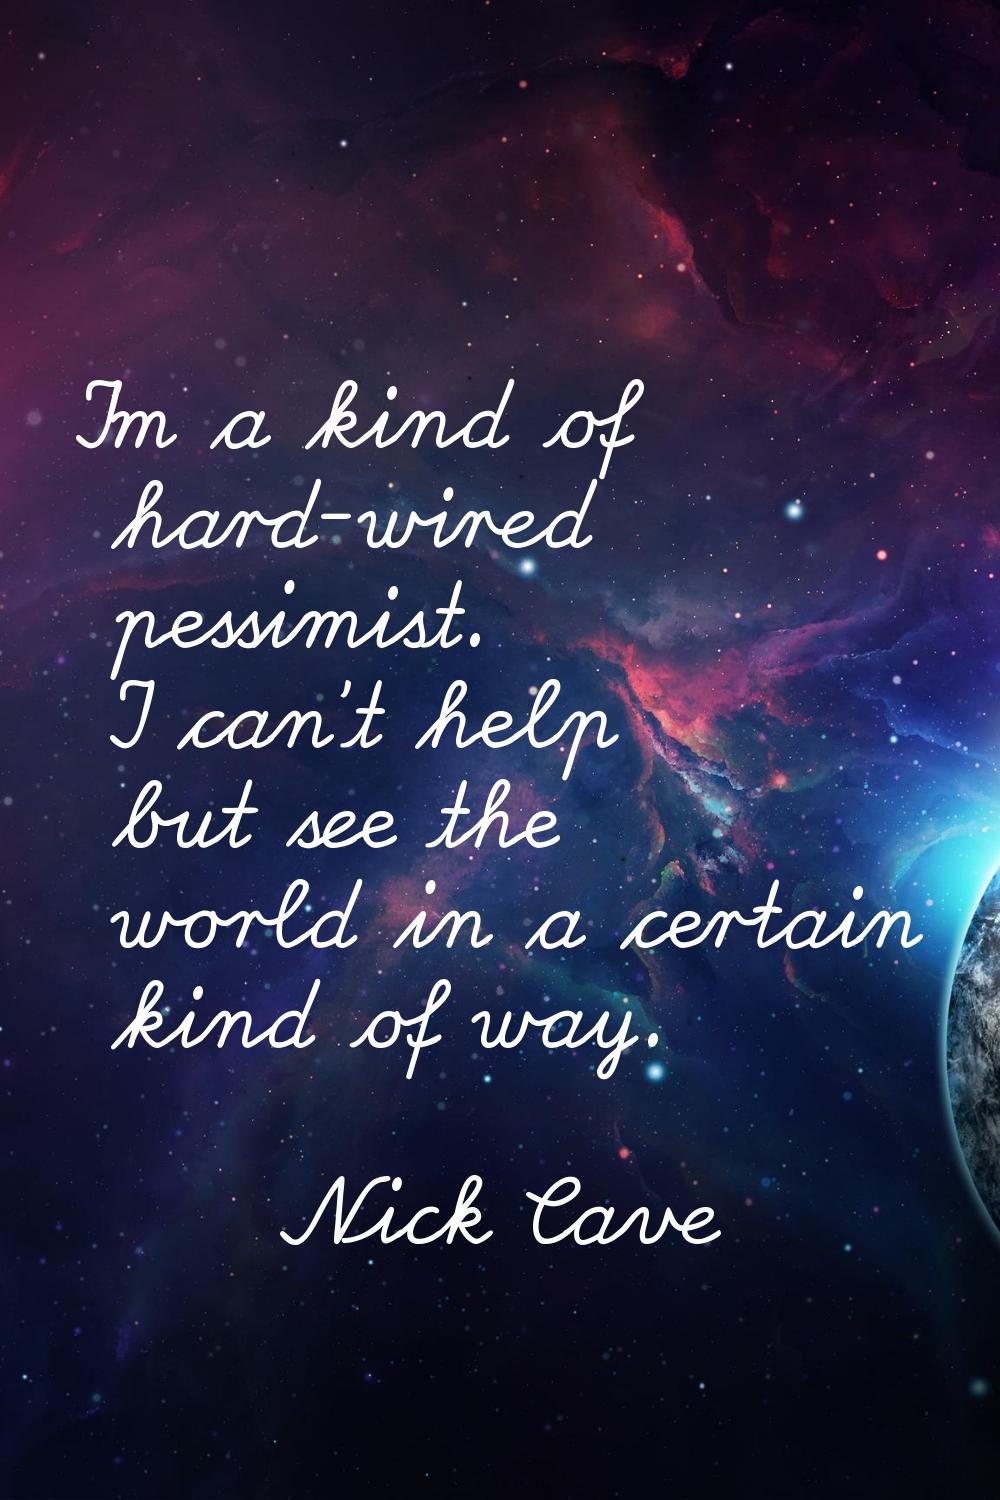 I'm a kind of hard-wired pessimist. I can't help but see the world in a certain kind of way.